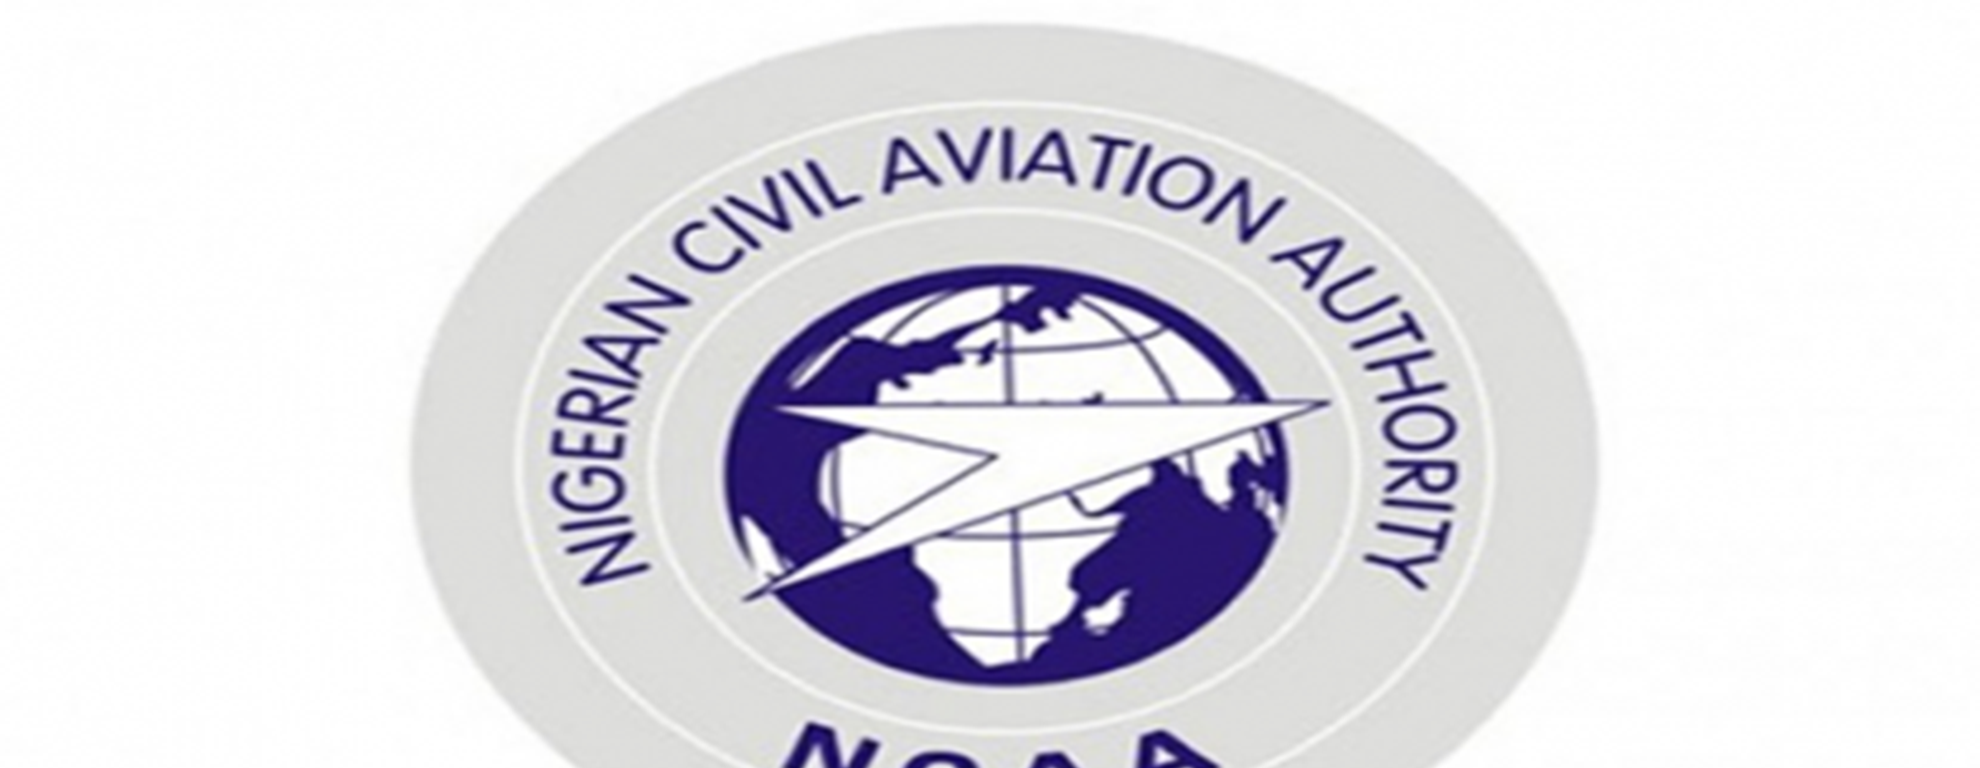 NCAA approves prepackaged in-fight catering service for passengers